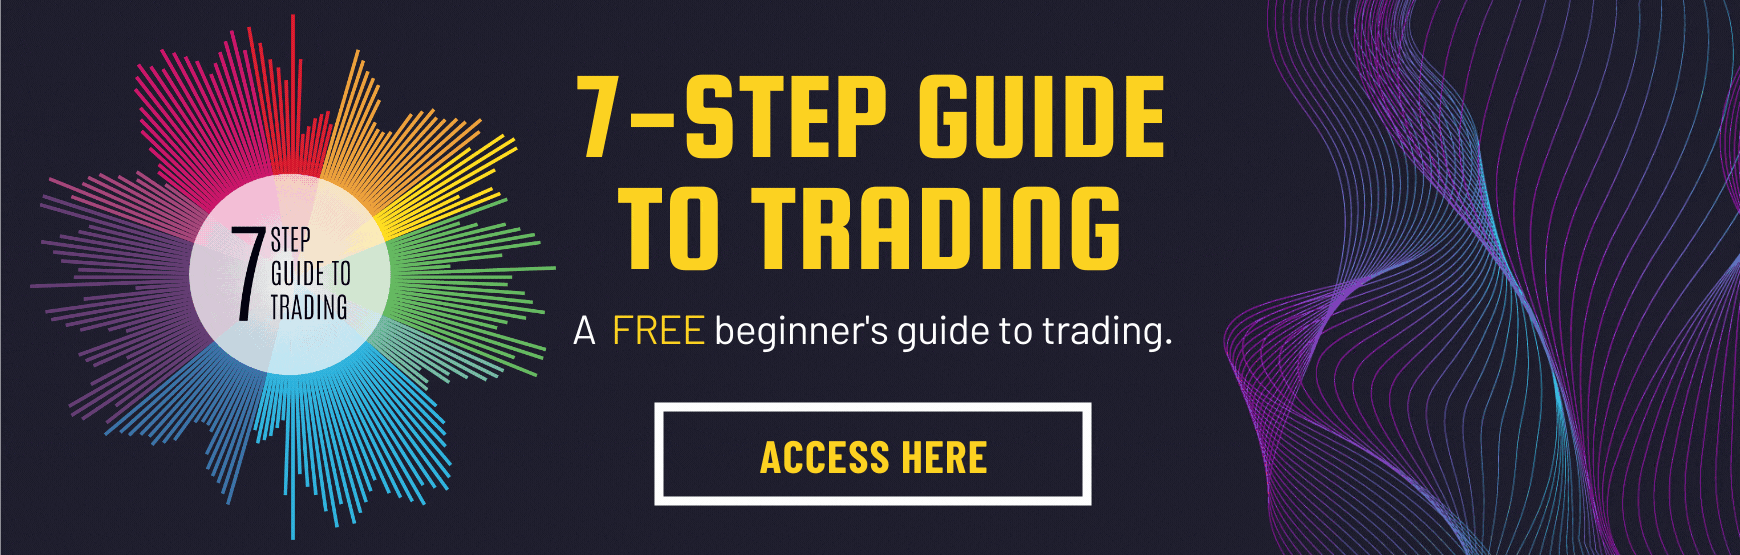 The 7-Step Guide to Trading is tailored to beginners: 100% basic, 100% essential and 100% FREE. Click on the image to get instant access.